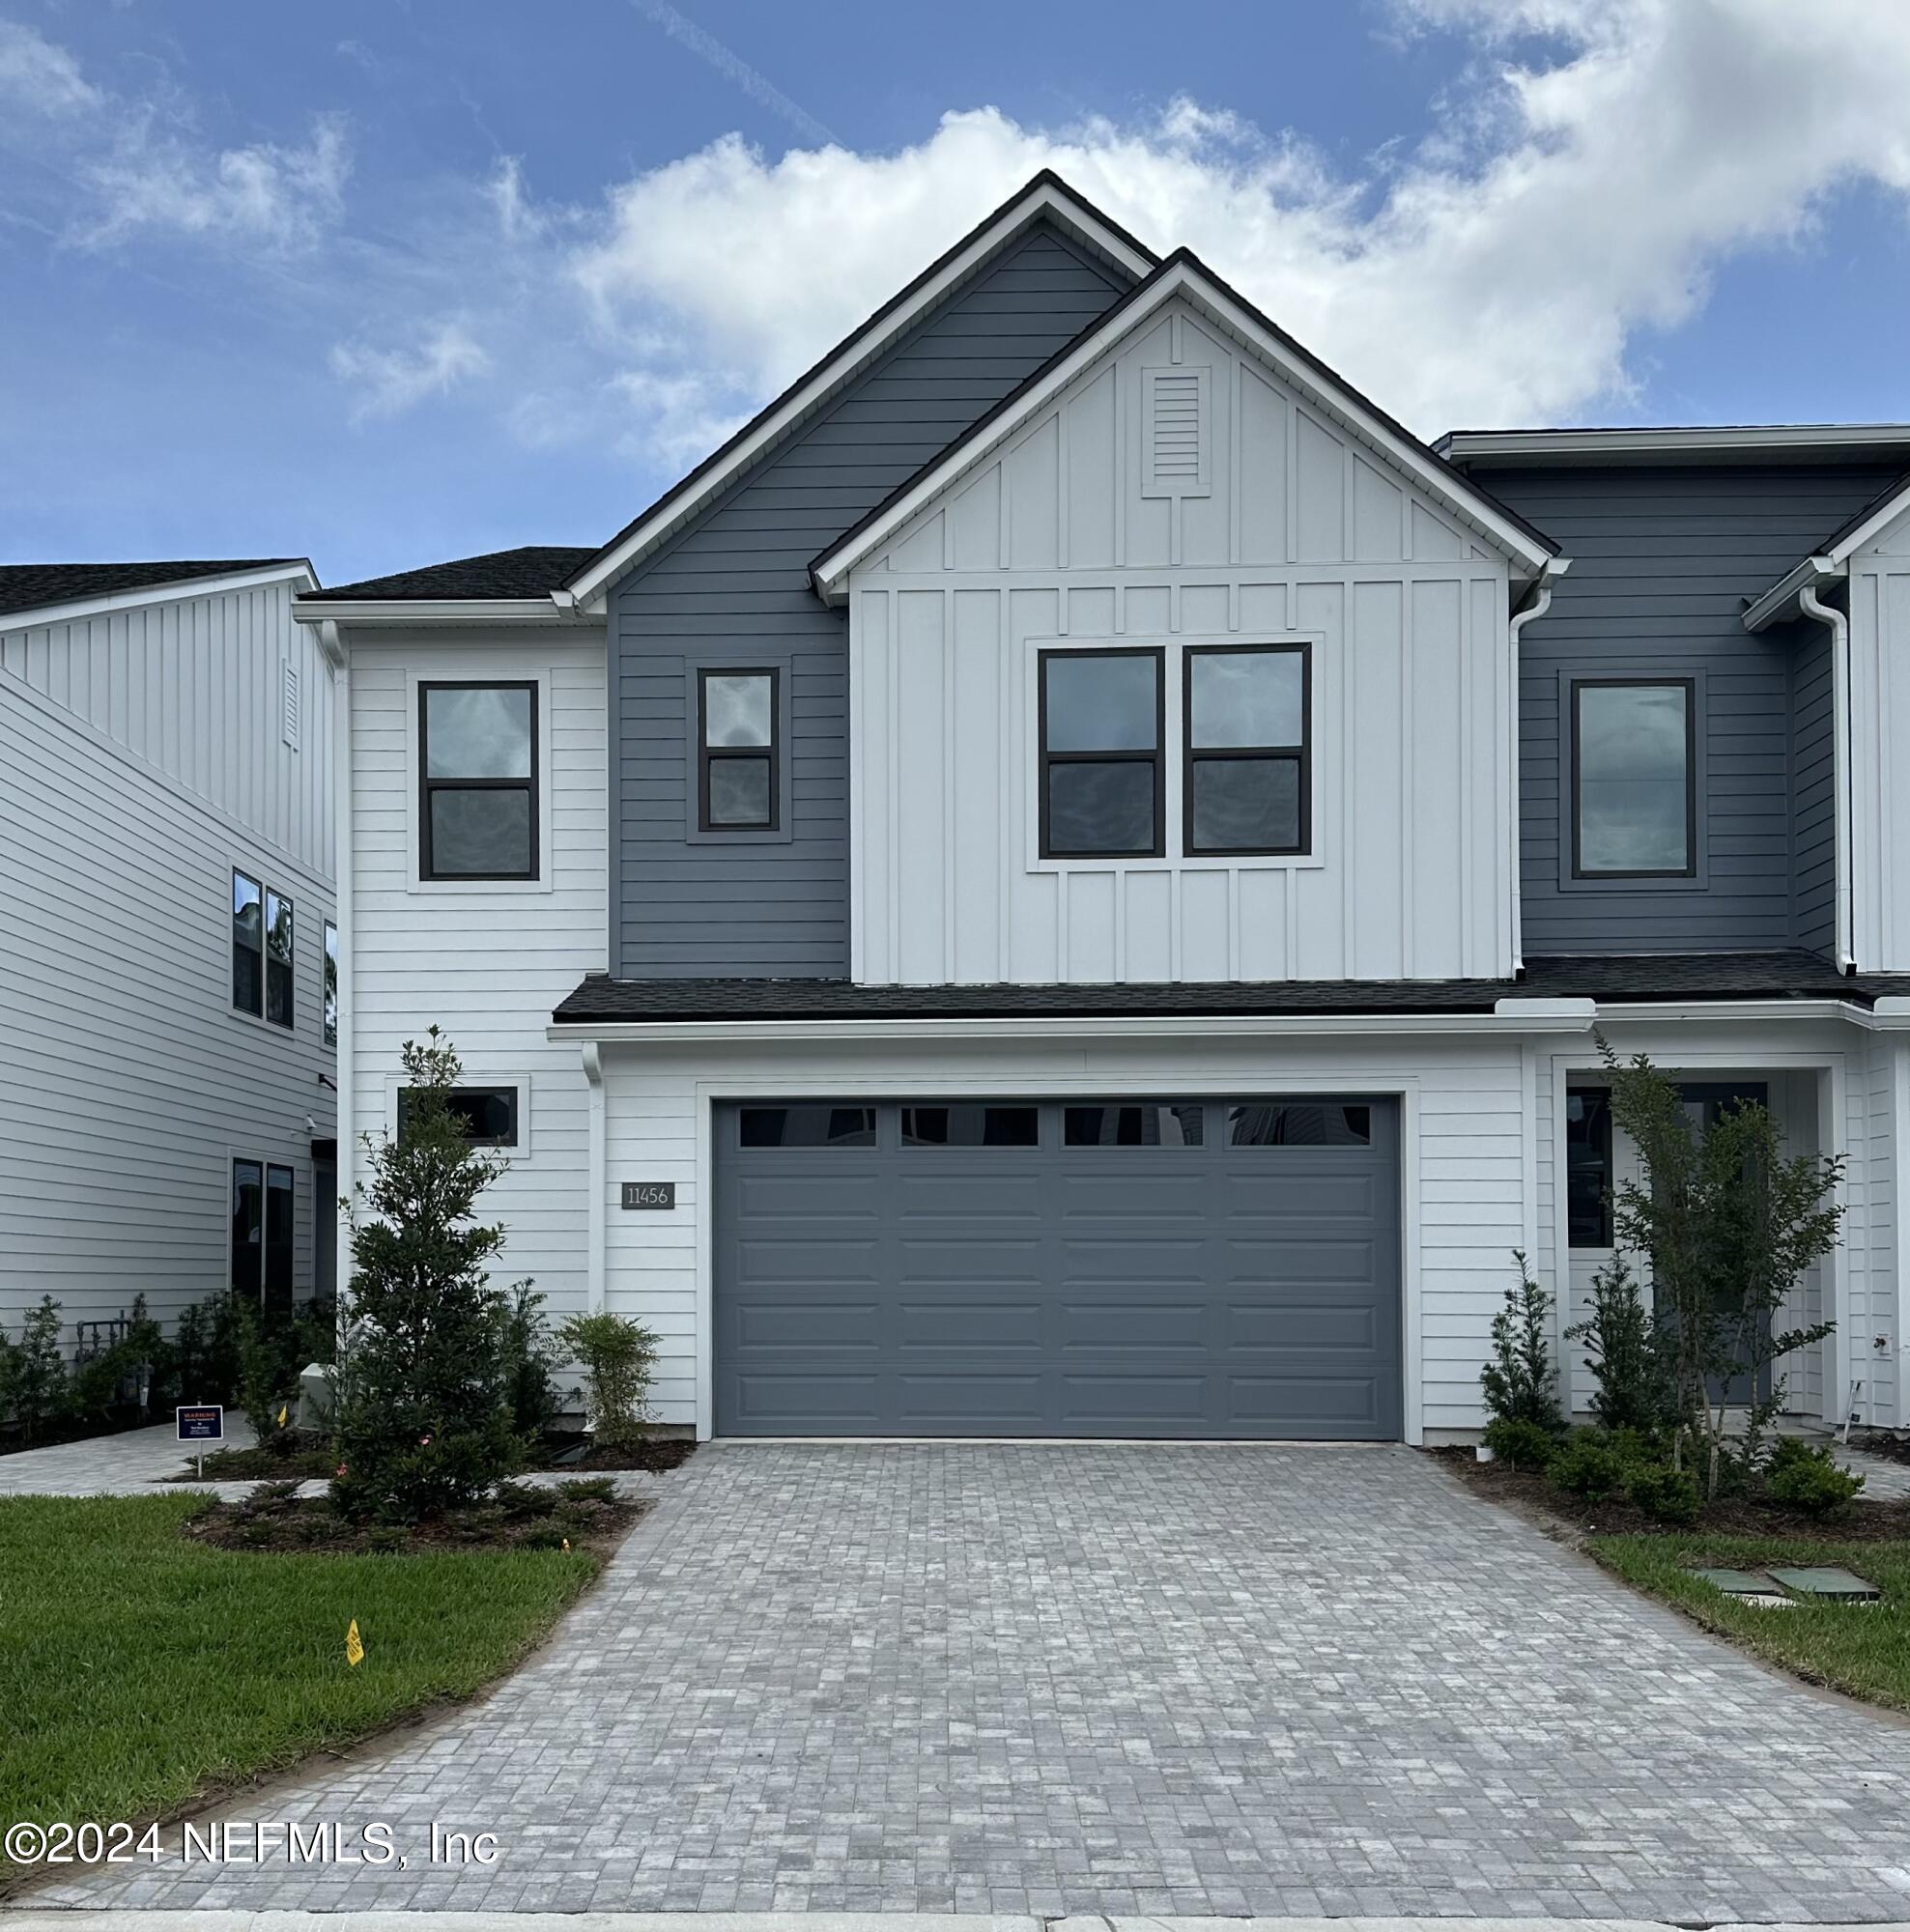 View Jacksonville, FL 32256 townhome